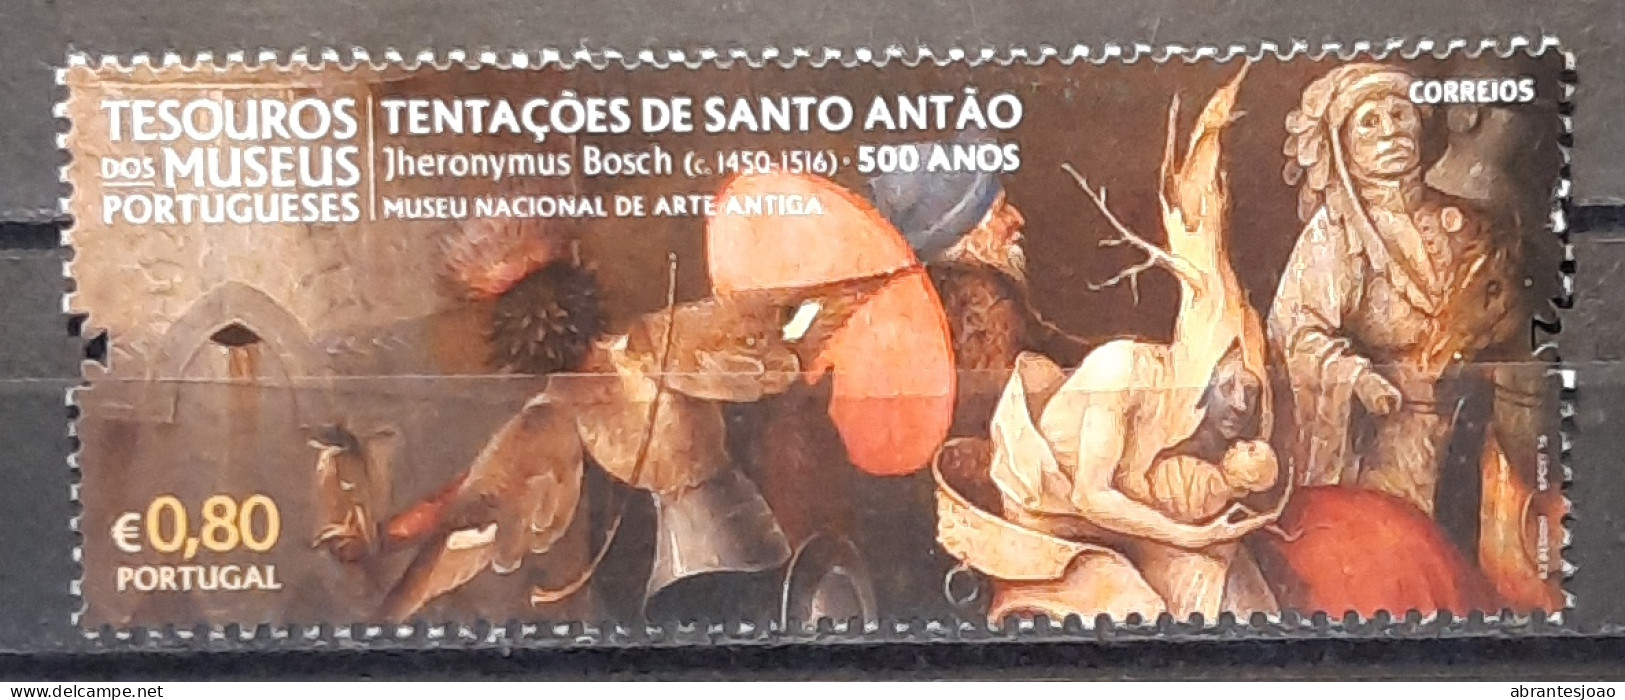 2016 - Portugal - MNH - Treasures Of Portuguese Museums - 2 Stamps + 2 Souvenir Sheets Of 1 Stamp - Ongebruikt